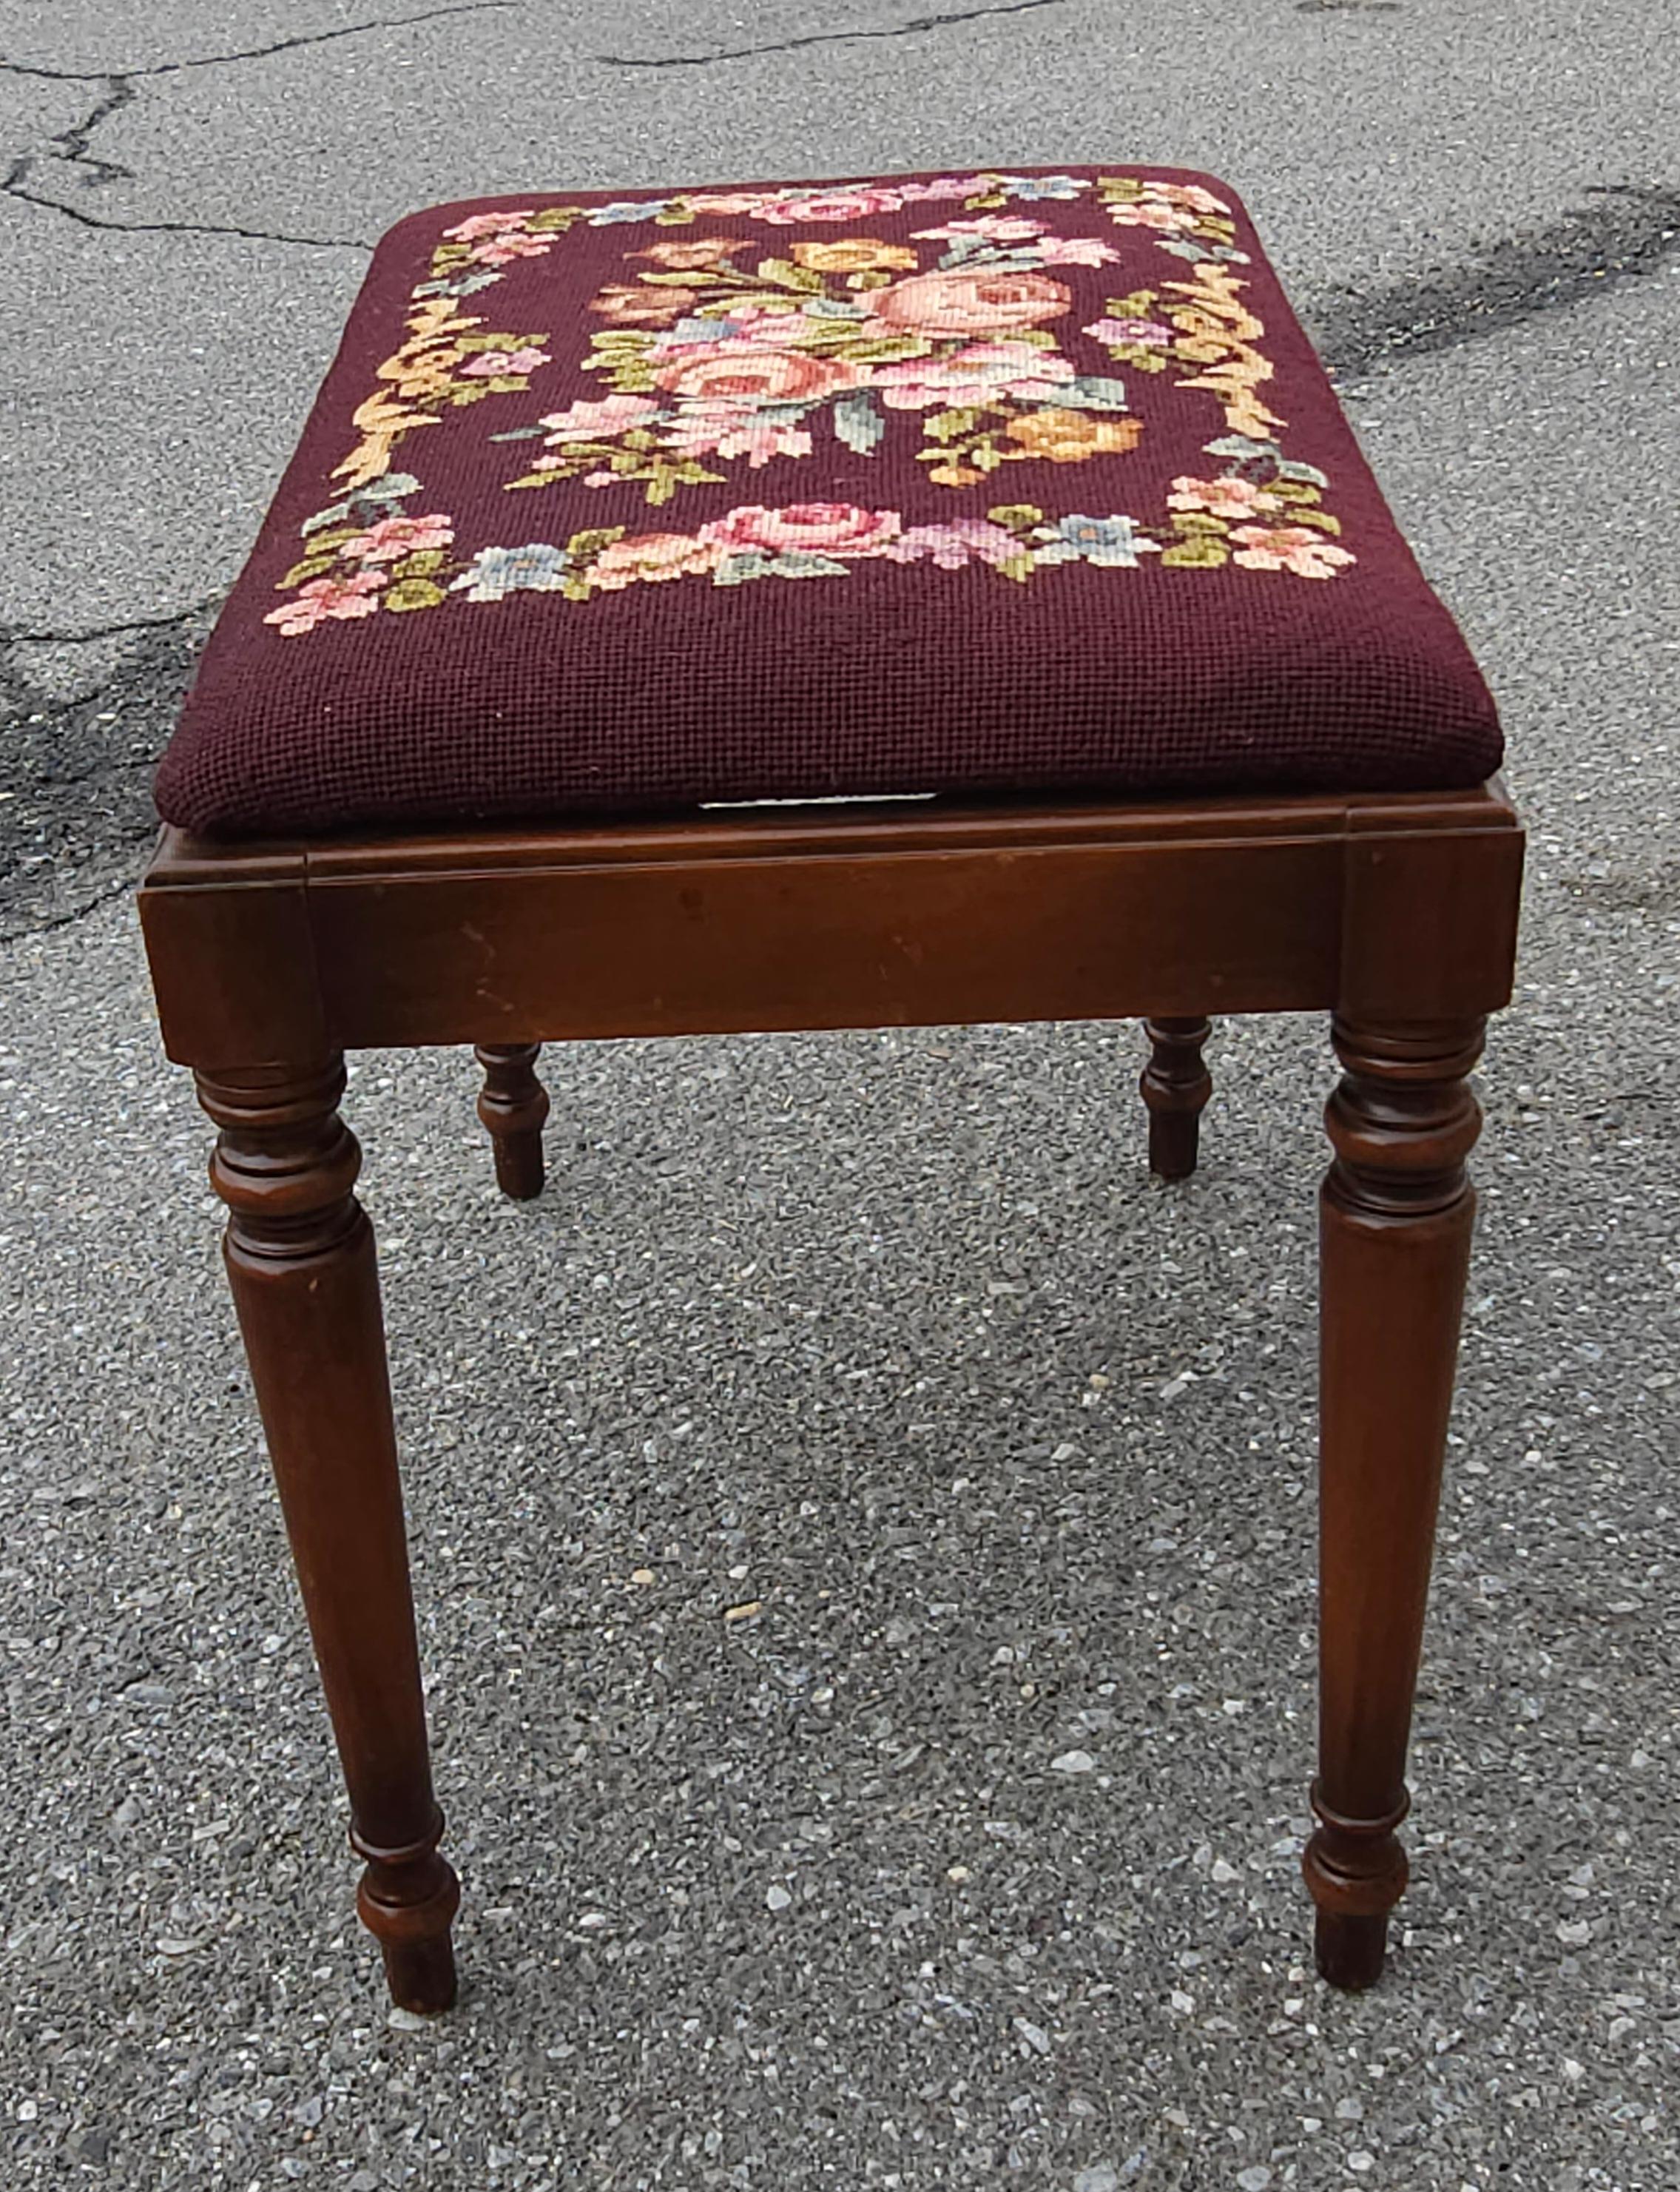 Mid 20th Century Kindel Furniture Oxford Cherry & Needlepoint Upholstered Bench For Sale 3